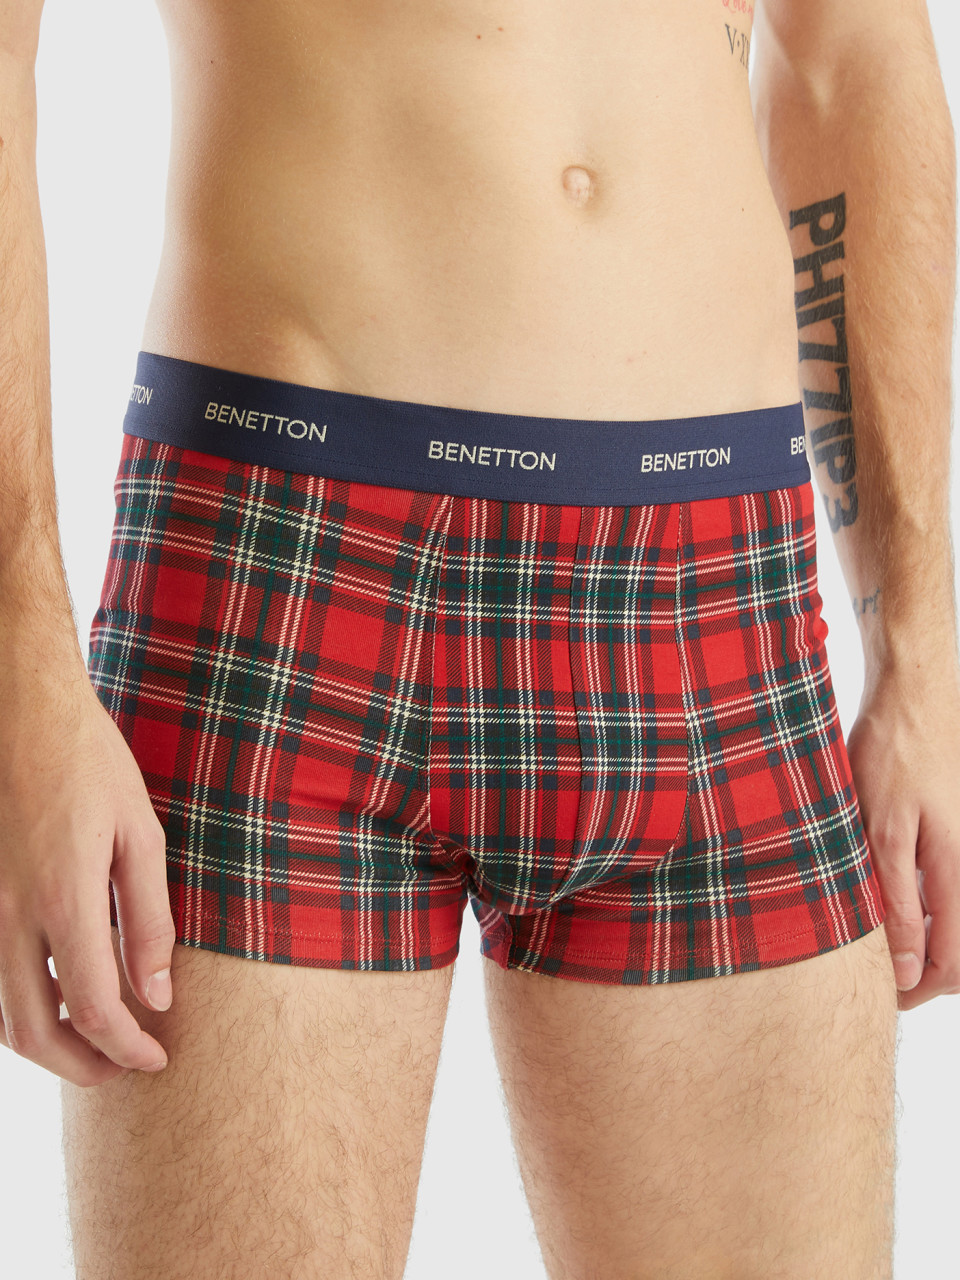 Benetton, Red And Blue Tartan Boxer Shorts, Red, Men